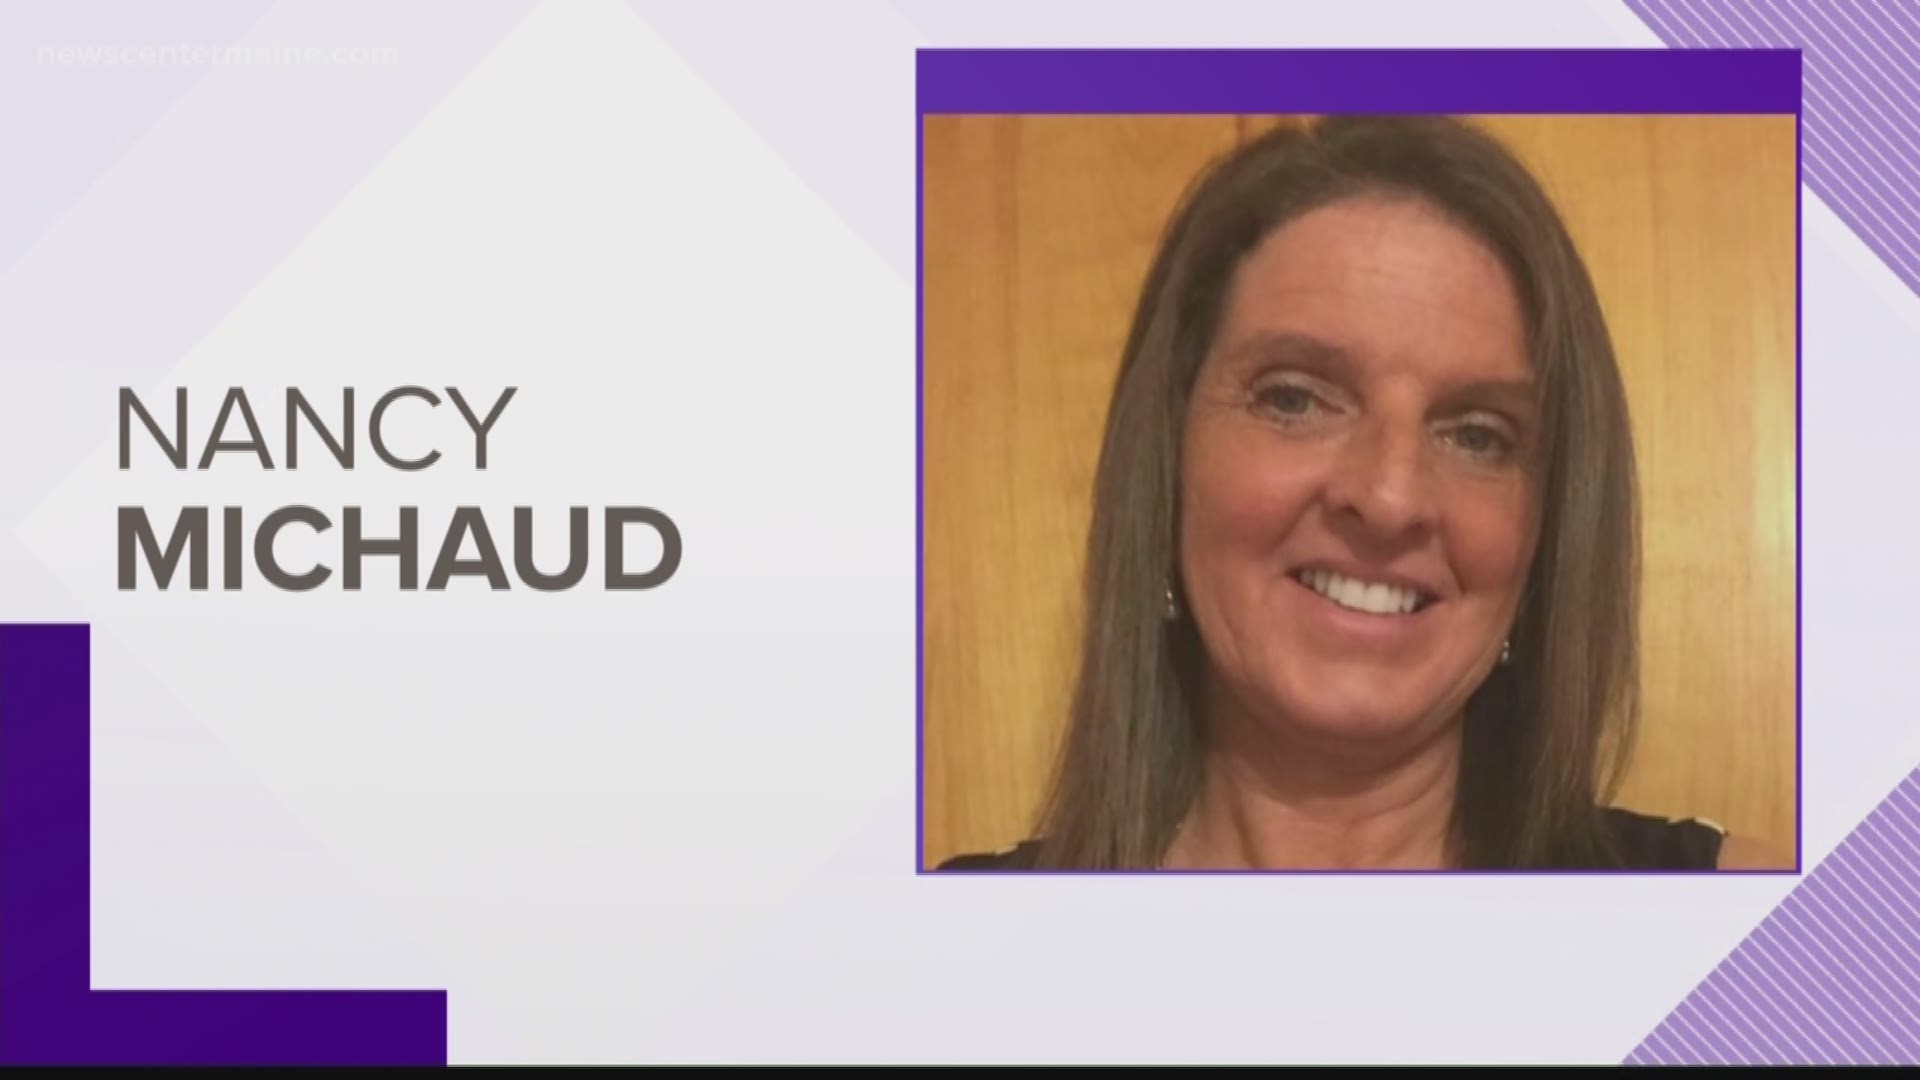 Nancy Michaud was found safe after being missing for a couple days